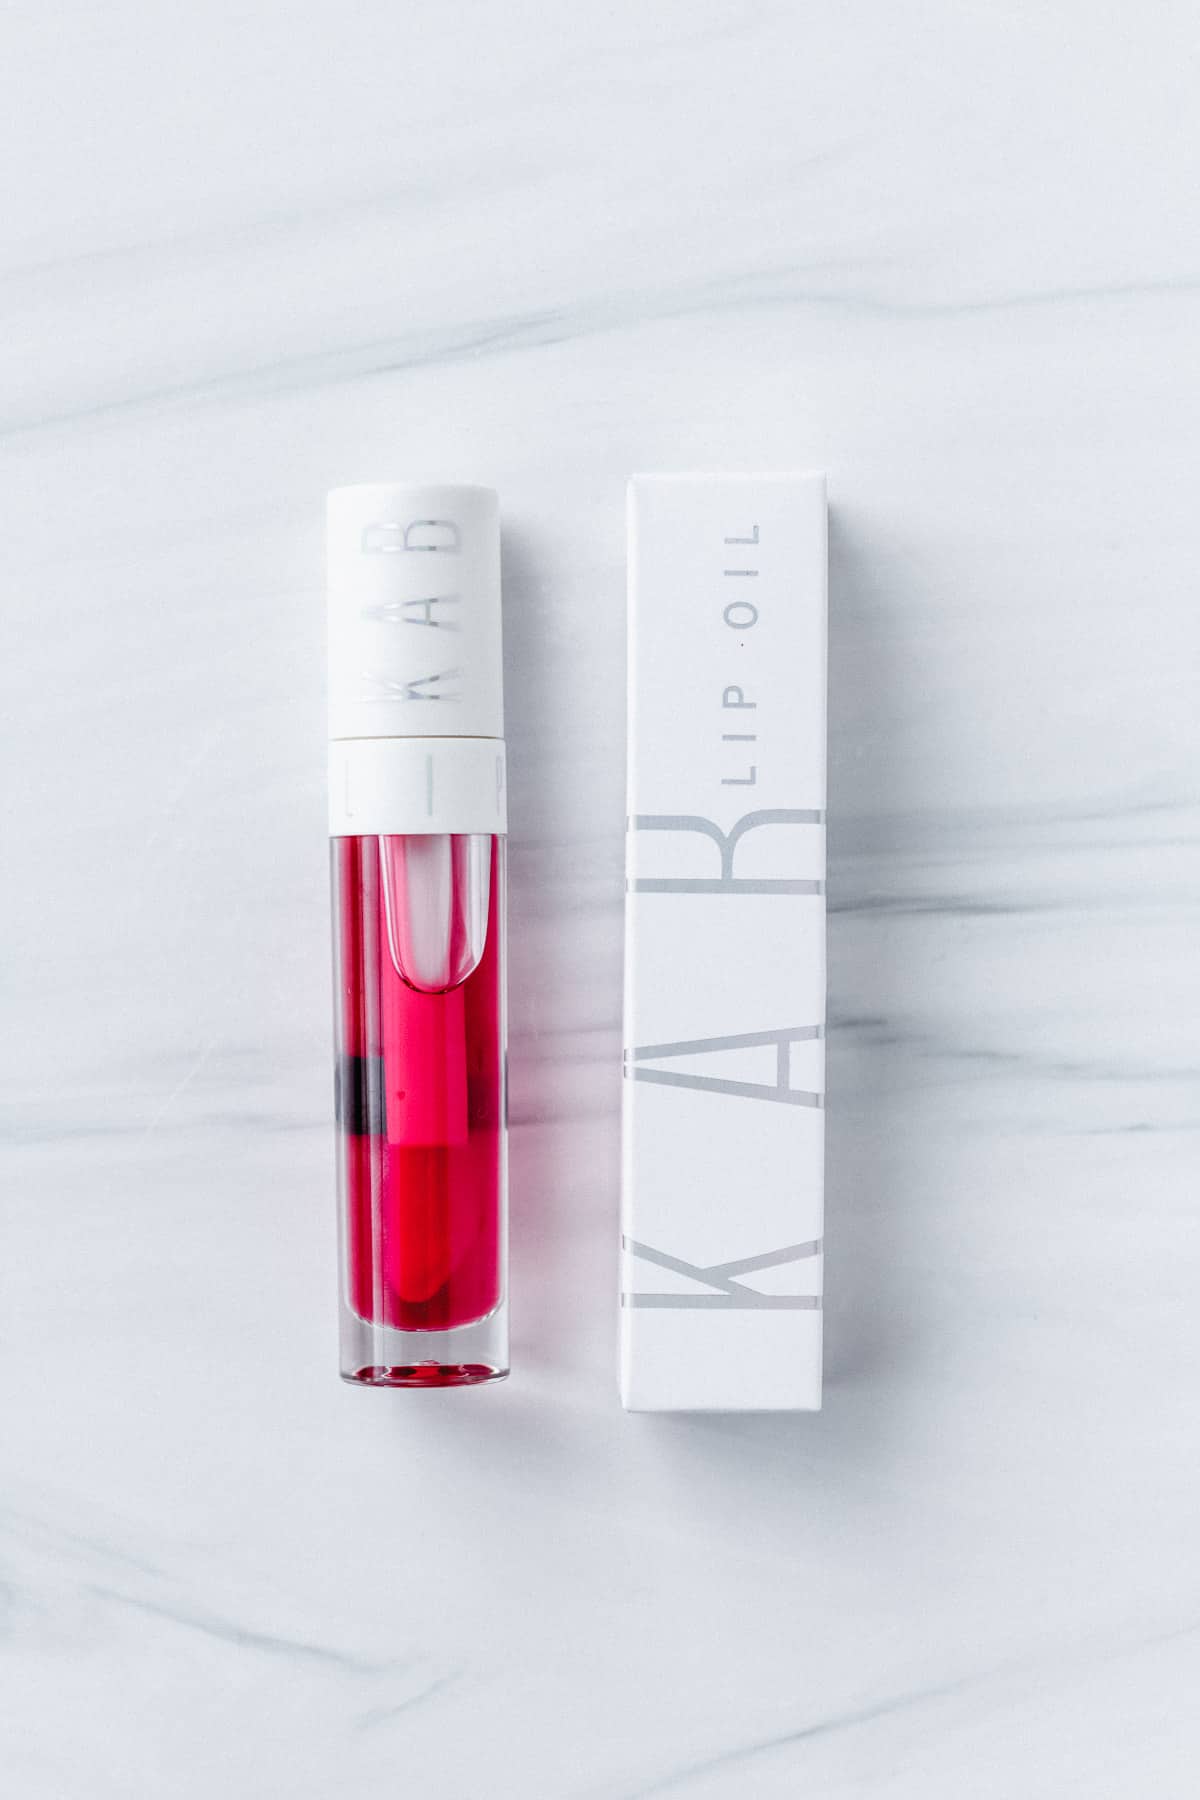 KAB cosmetics lip oil in rum punch bottle and box on a white background